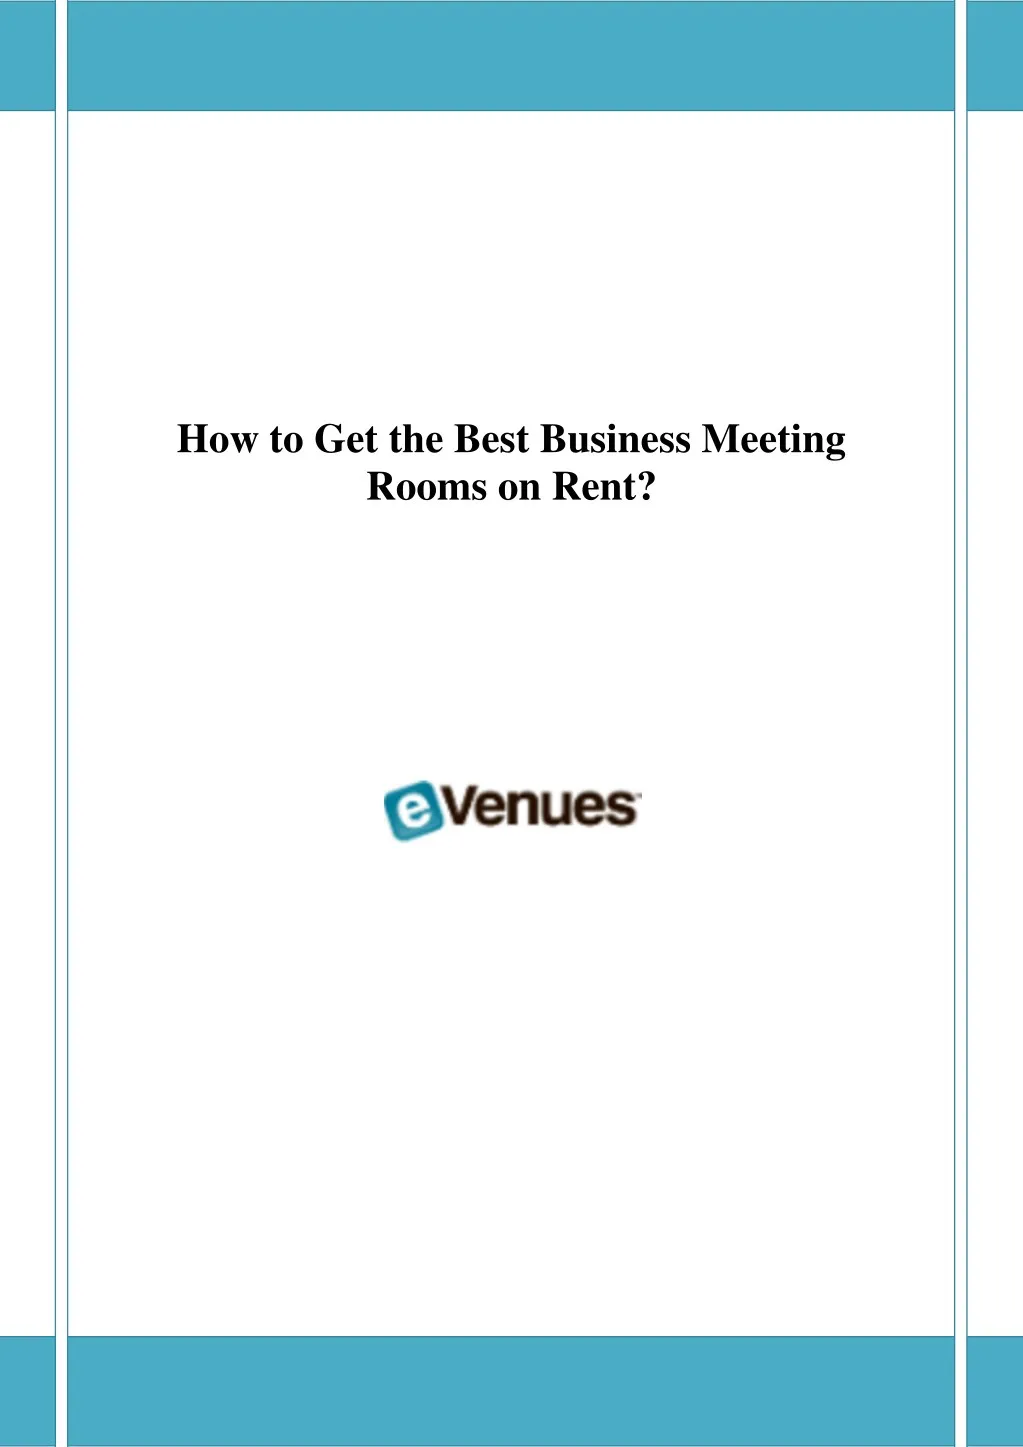 how to get the best business meeting rooms on rent